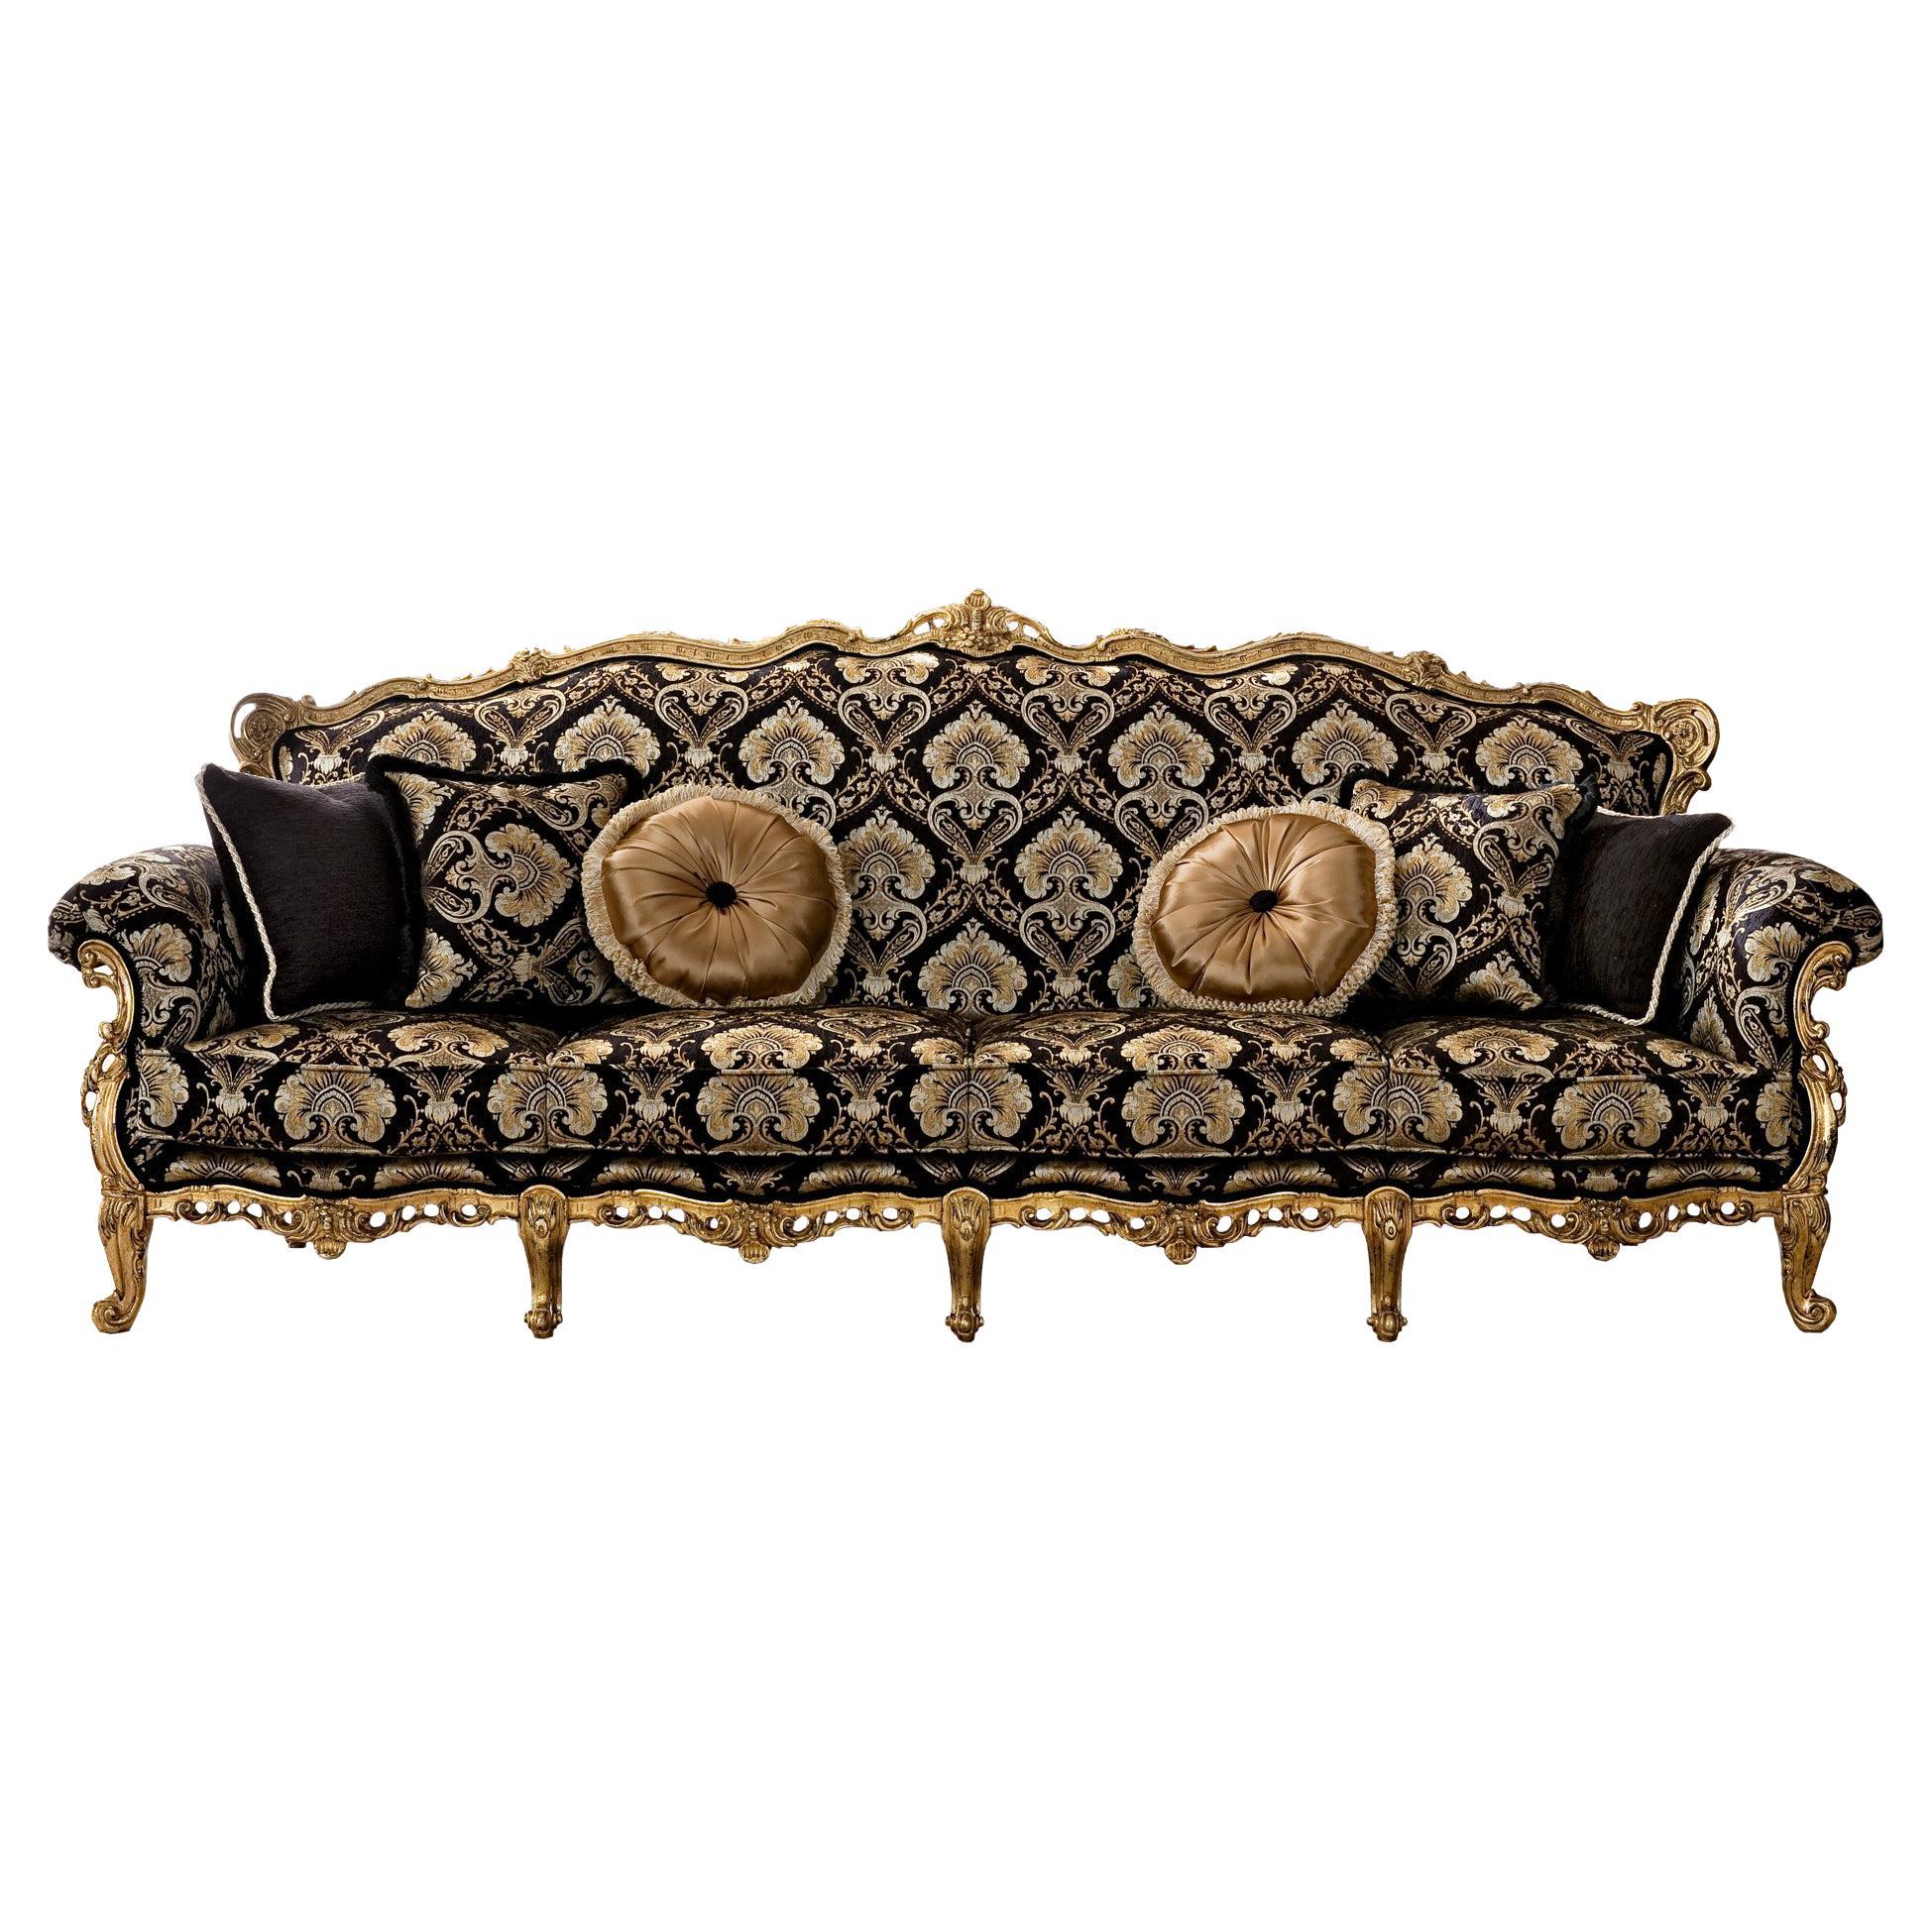 Grand Baroque Four-Seater Sofa in Massive Wood and Patinated Gold Leaf For Sale